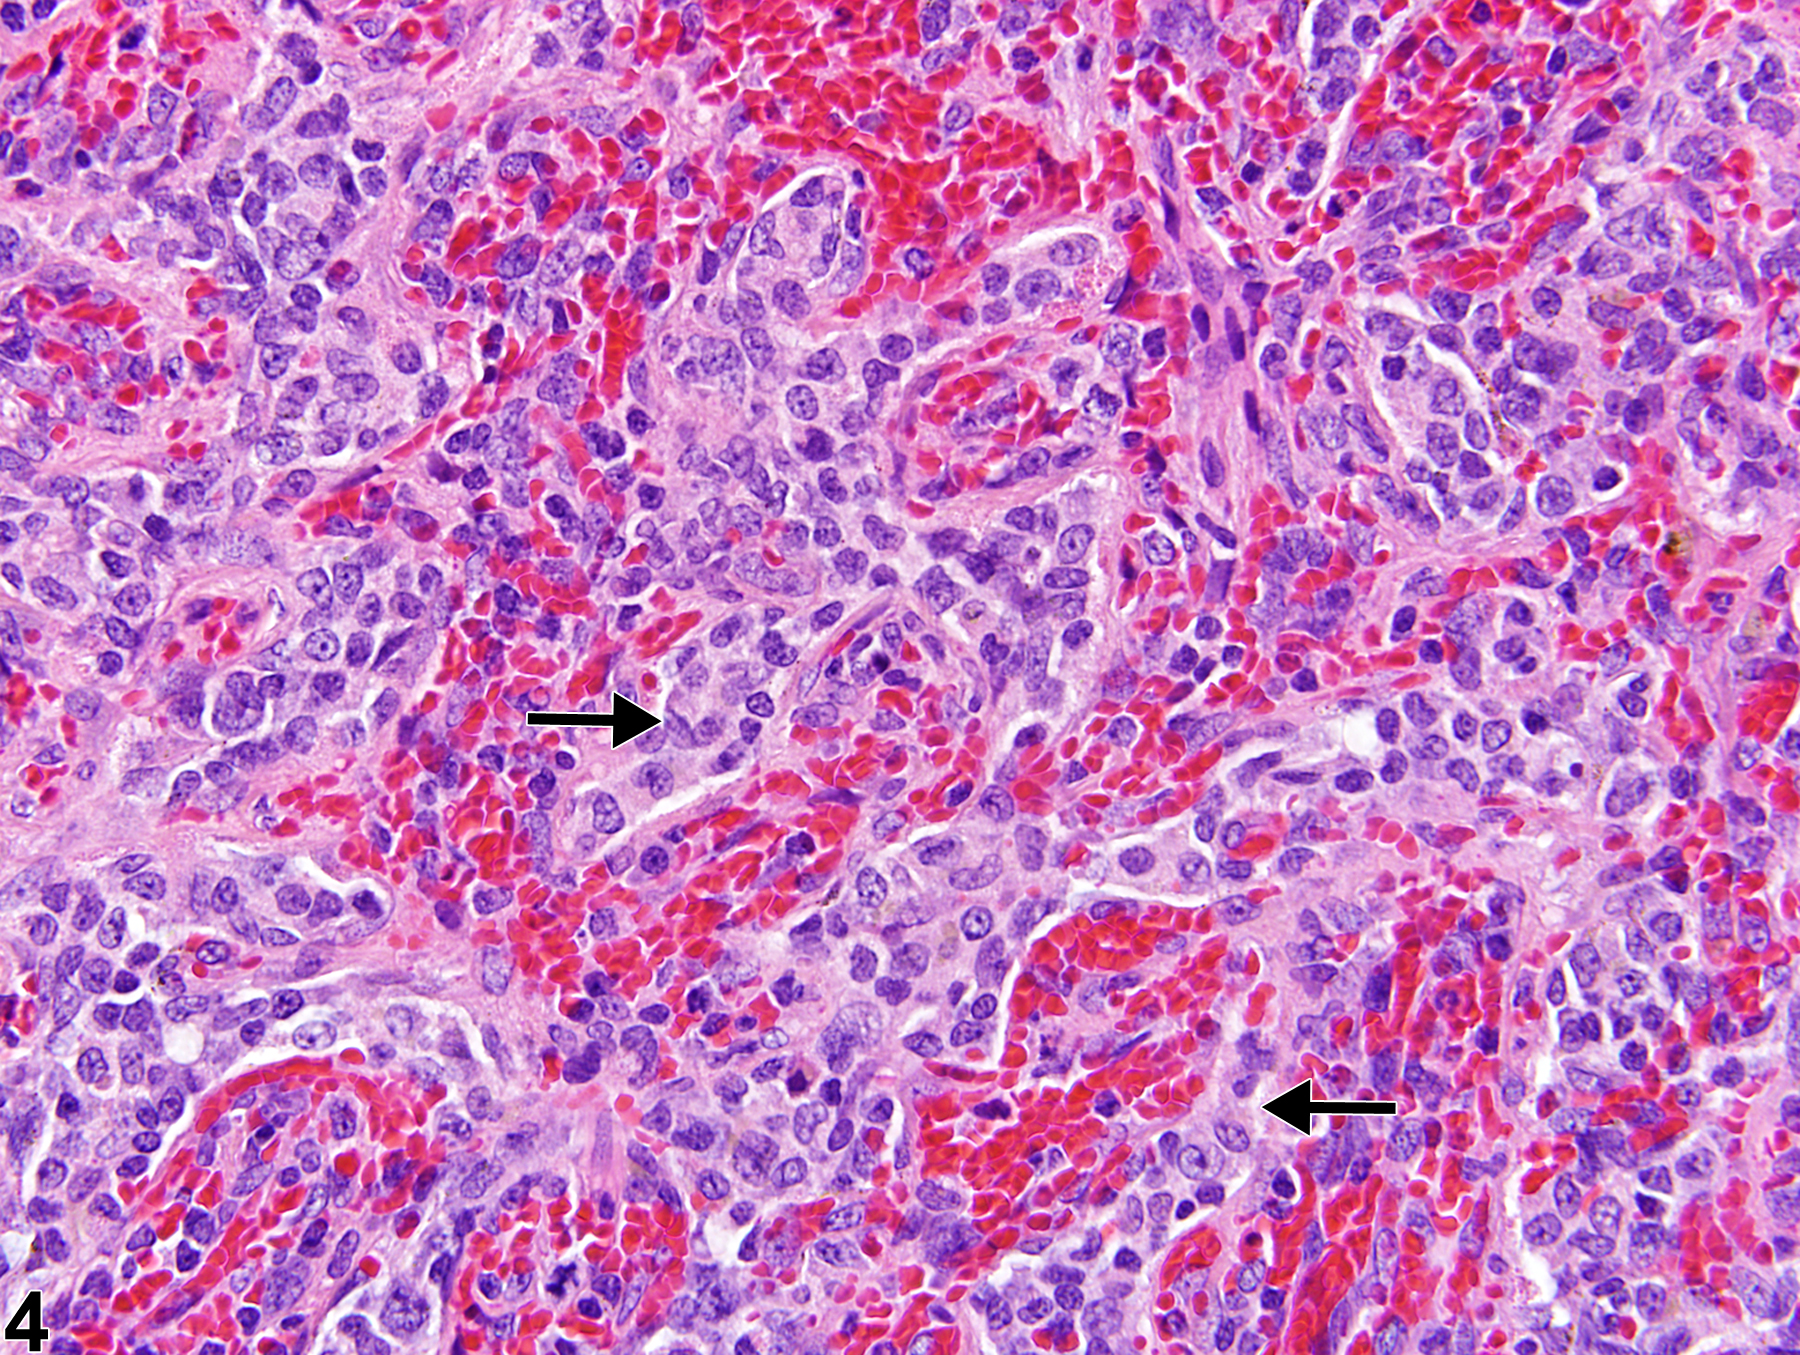 Image of hyperplasia, stromal cell in the spleen from a female F344/N rat in a chronic study